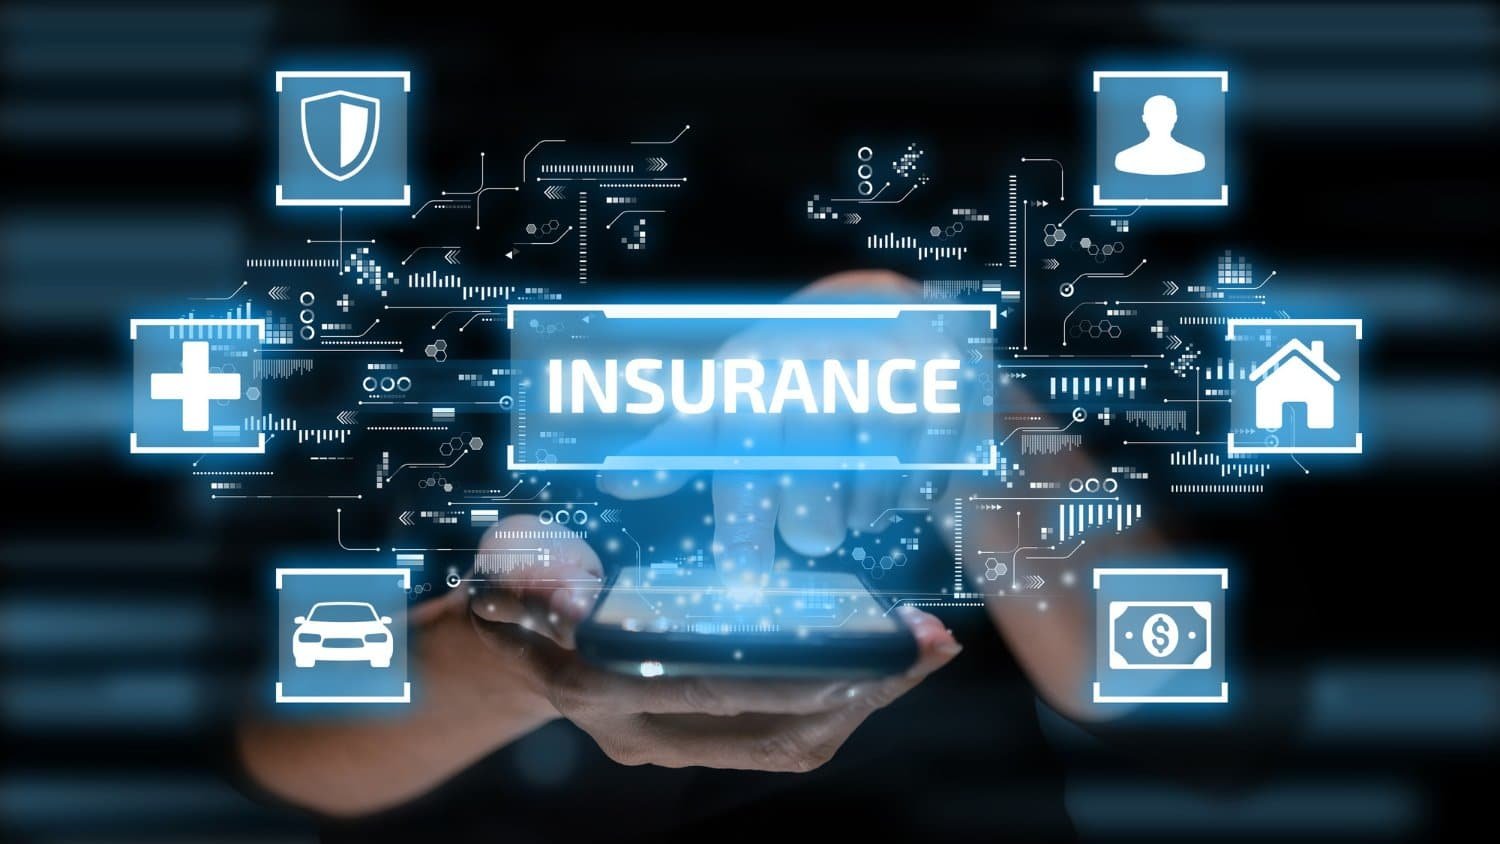 Insurtech: Transforming Insurance with Technology